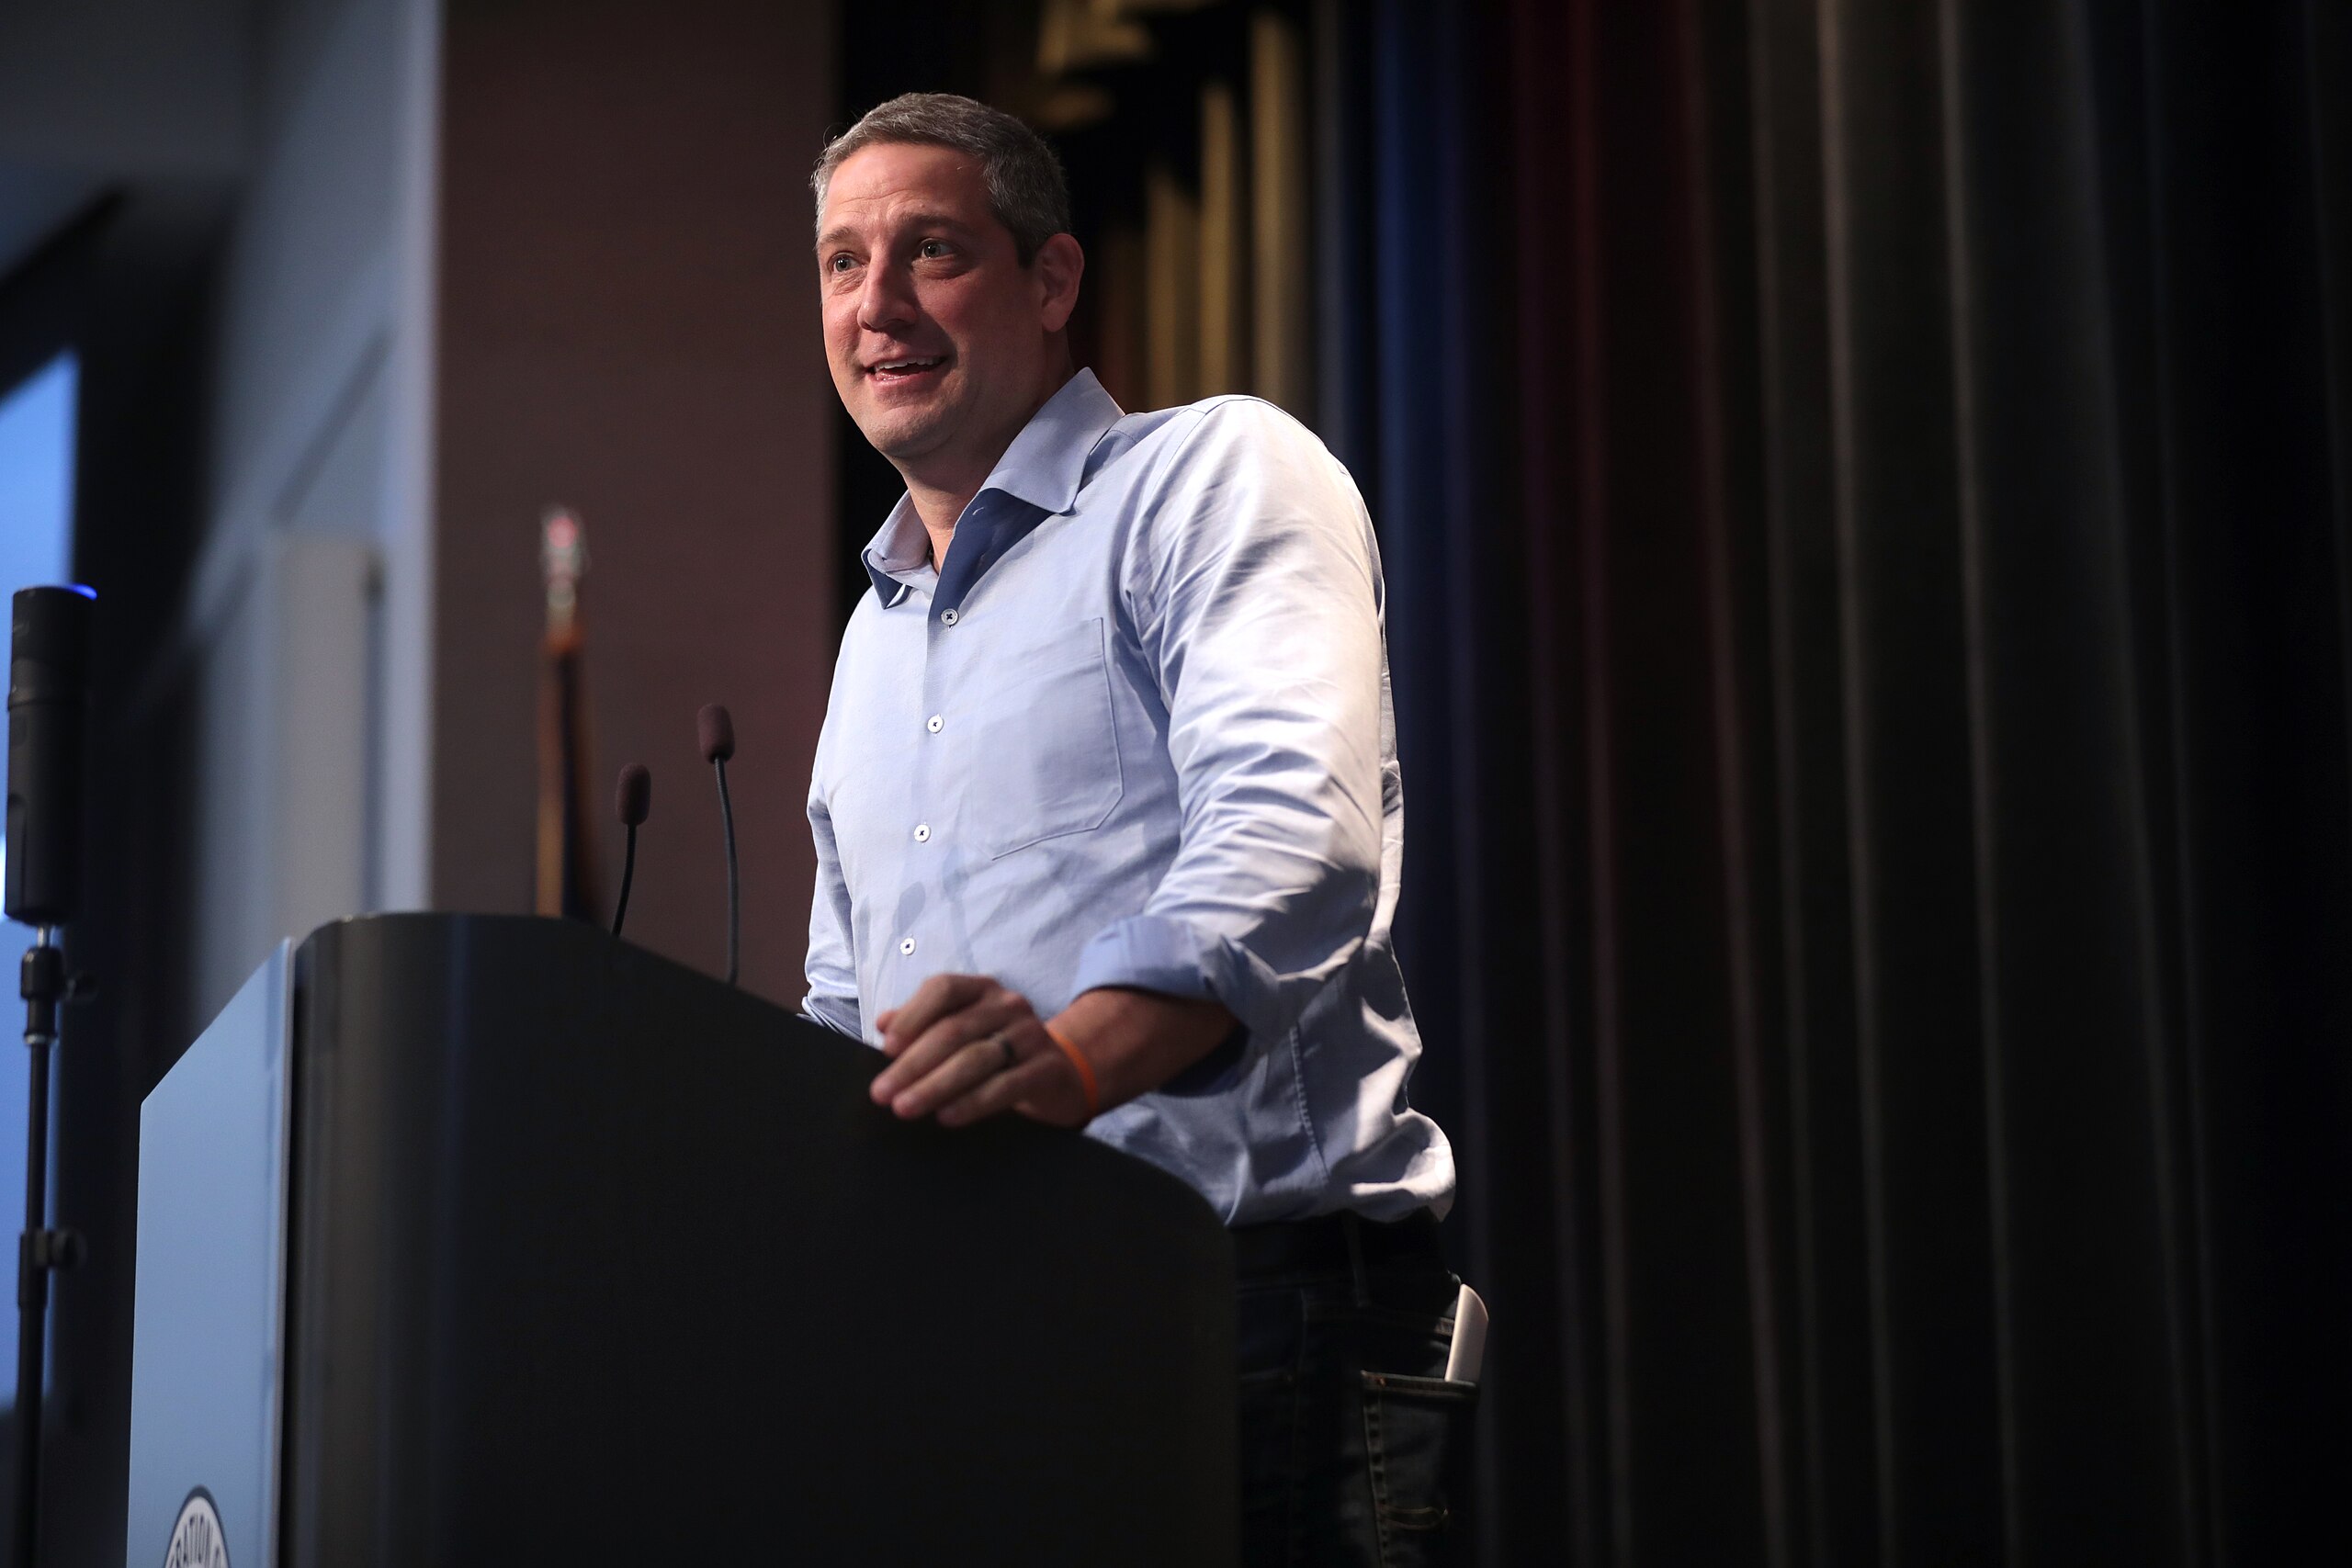 Tim Ryan’s Natural Gas Advocacy Makes a Mockery of Public Service